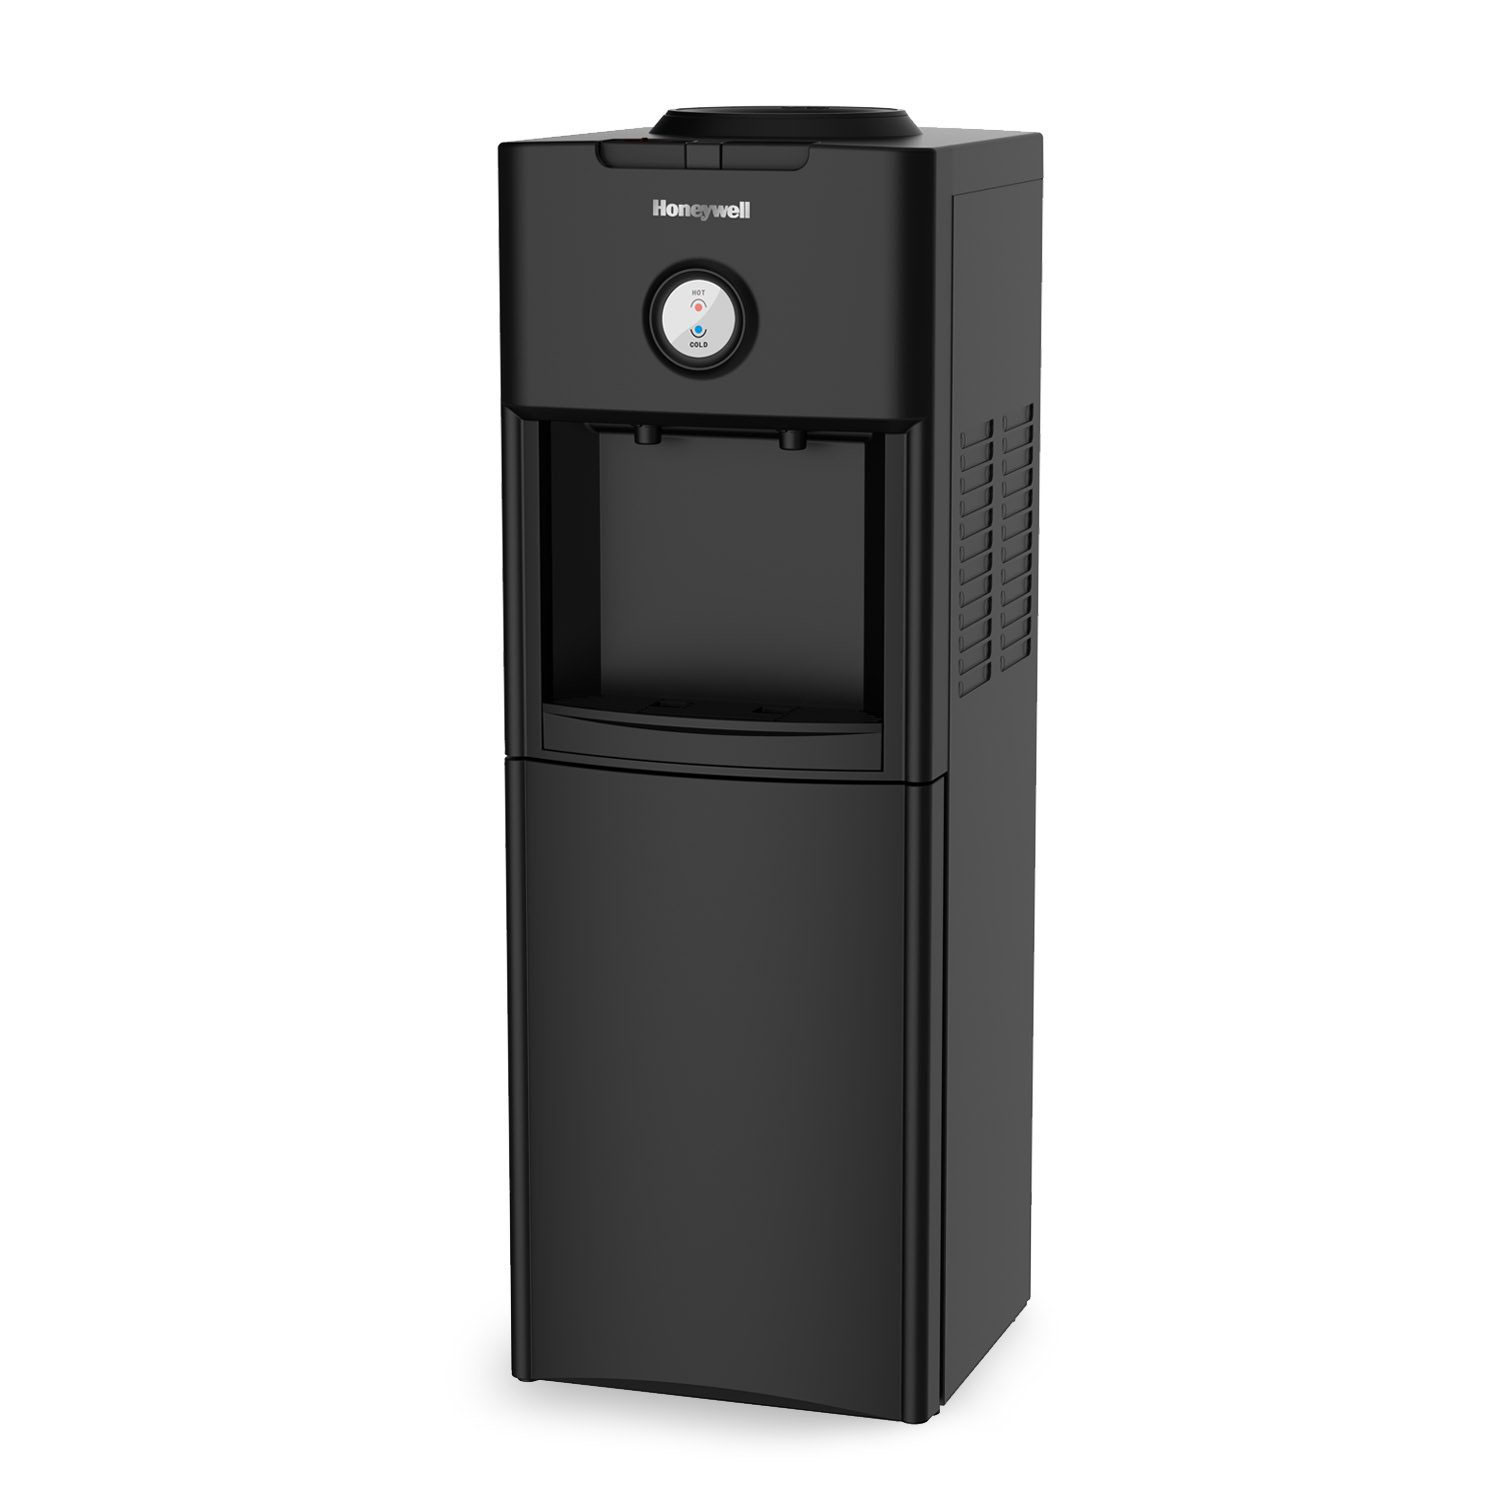 Honeywell 34-Inch Freestanding Toploading Water Cooler, Hot & Cold Temperatures with Thermostat Control, Black - HWB1062B